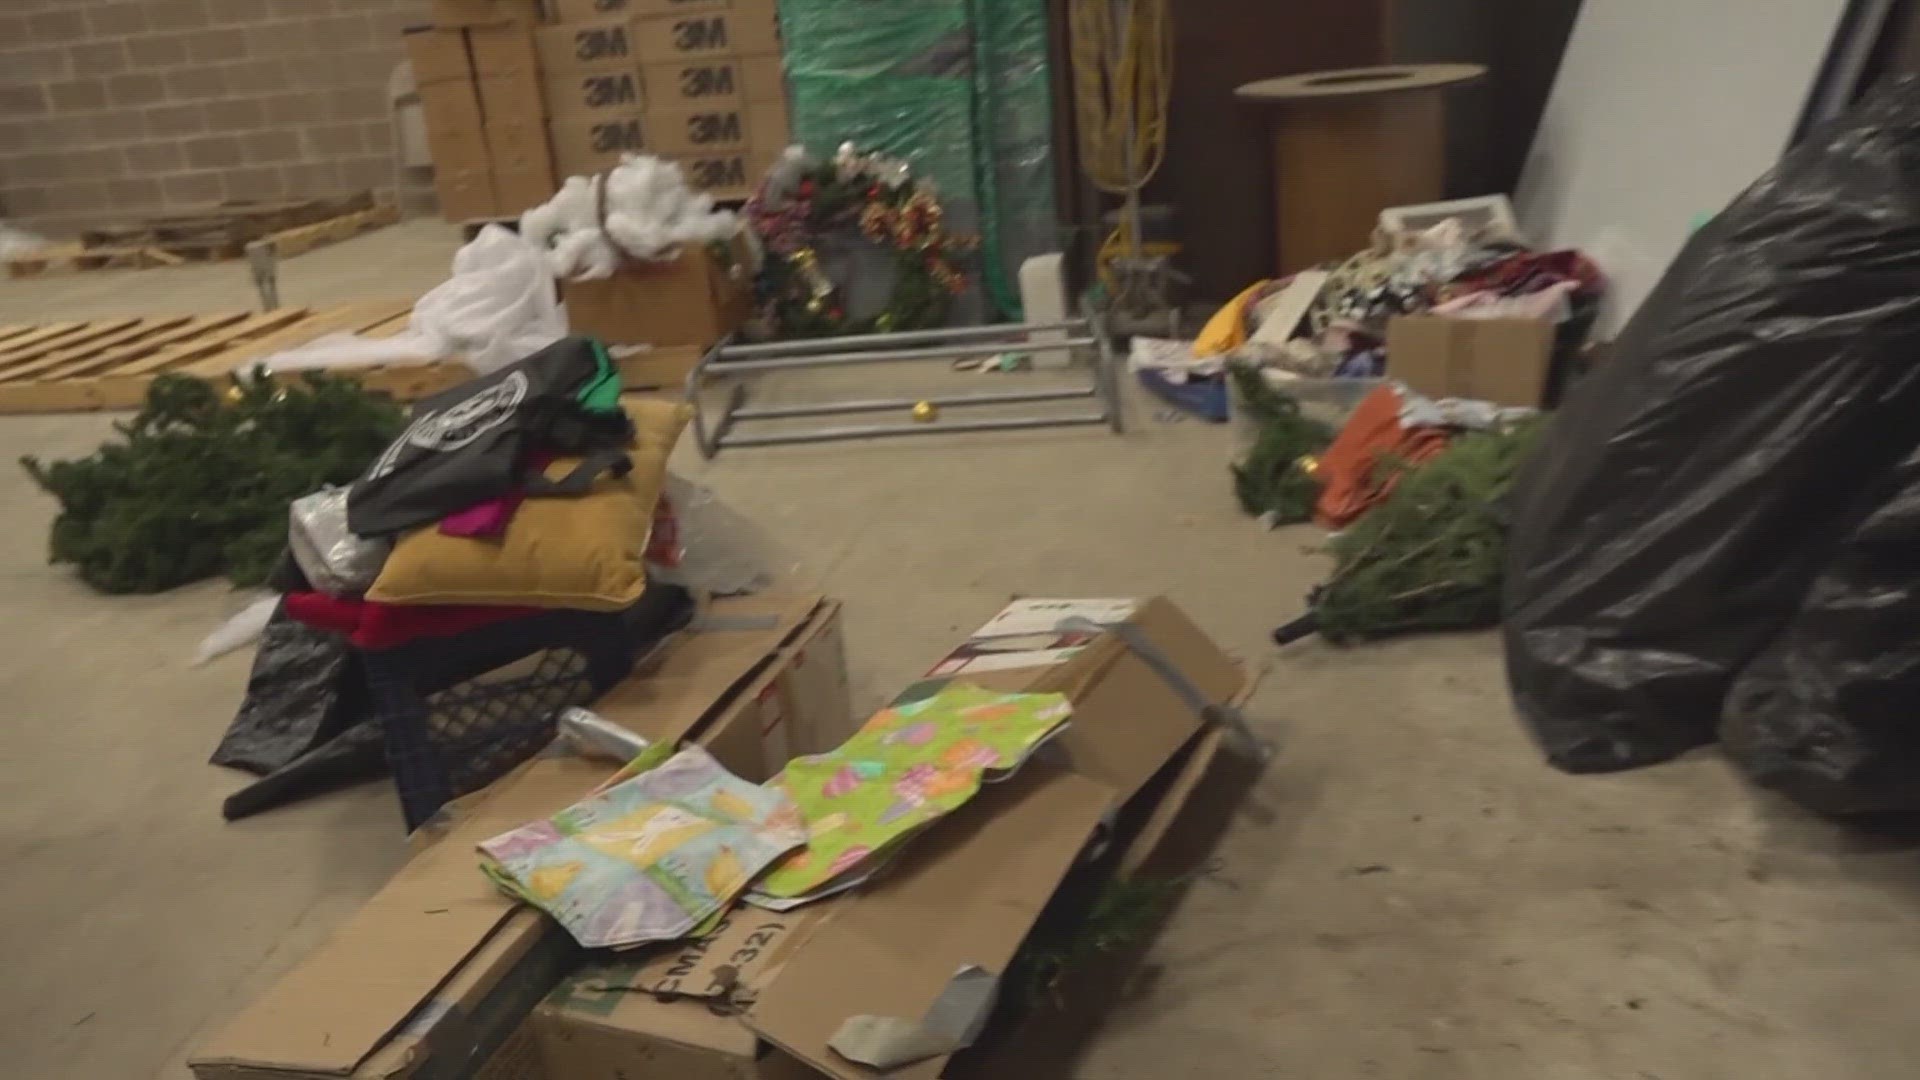 Monster Moms needs help after someone broke in and trashed their office